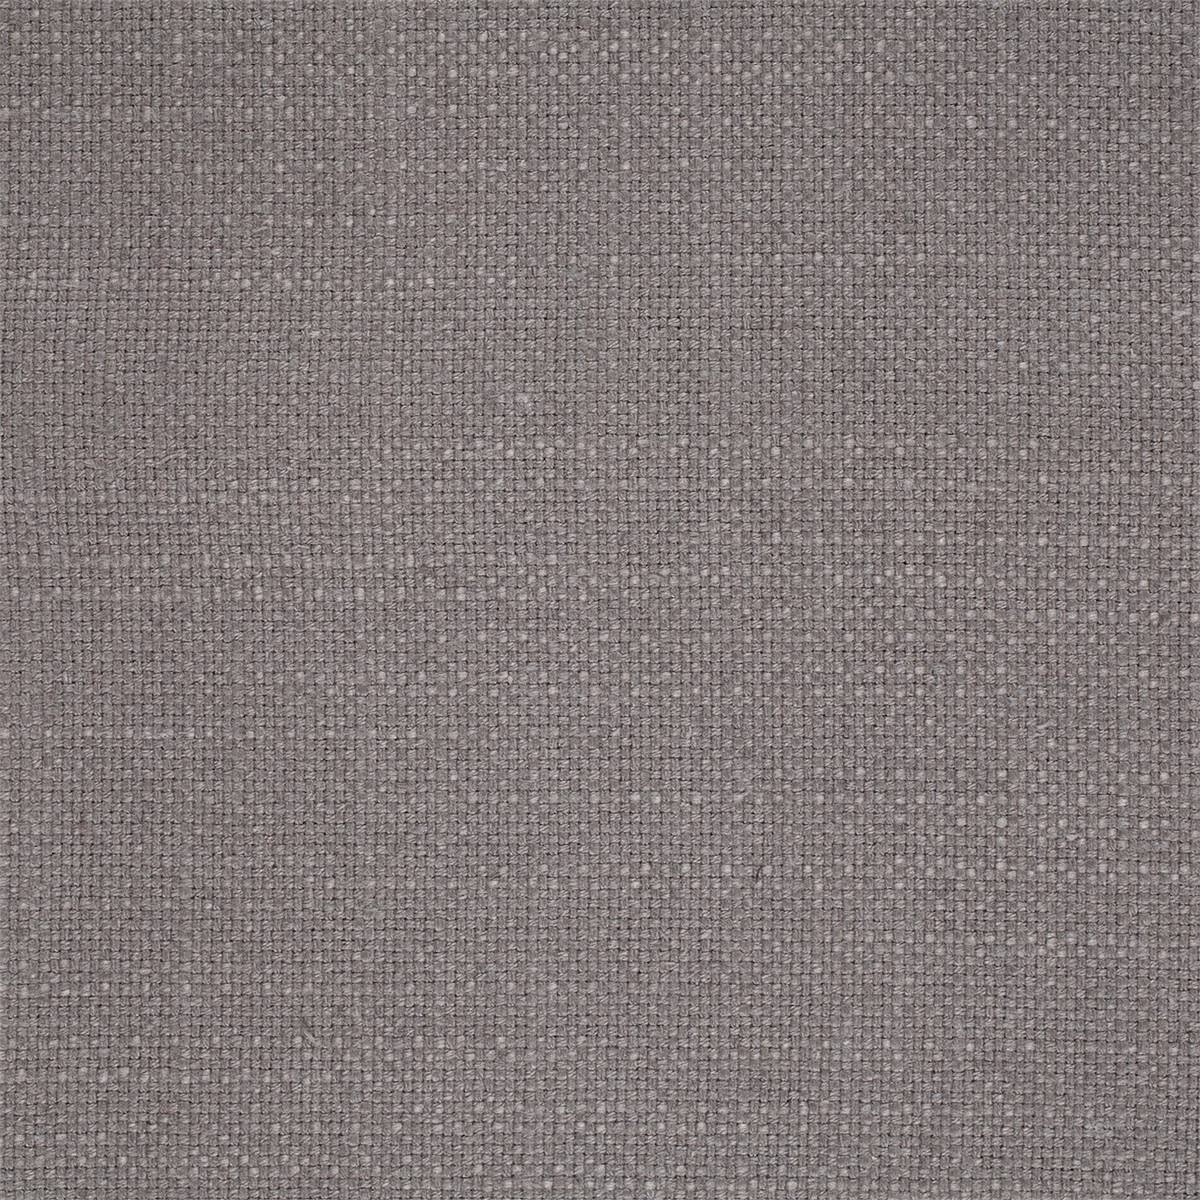 Tuscany Taupe Fabric by Sanderson